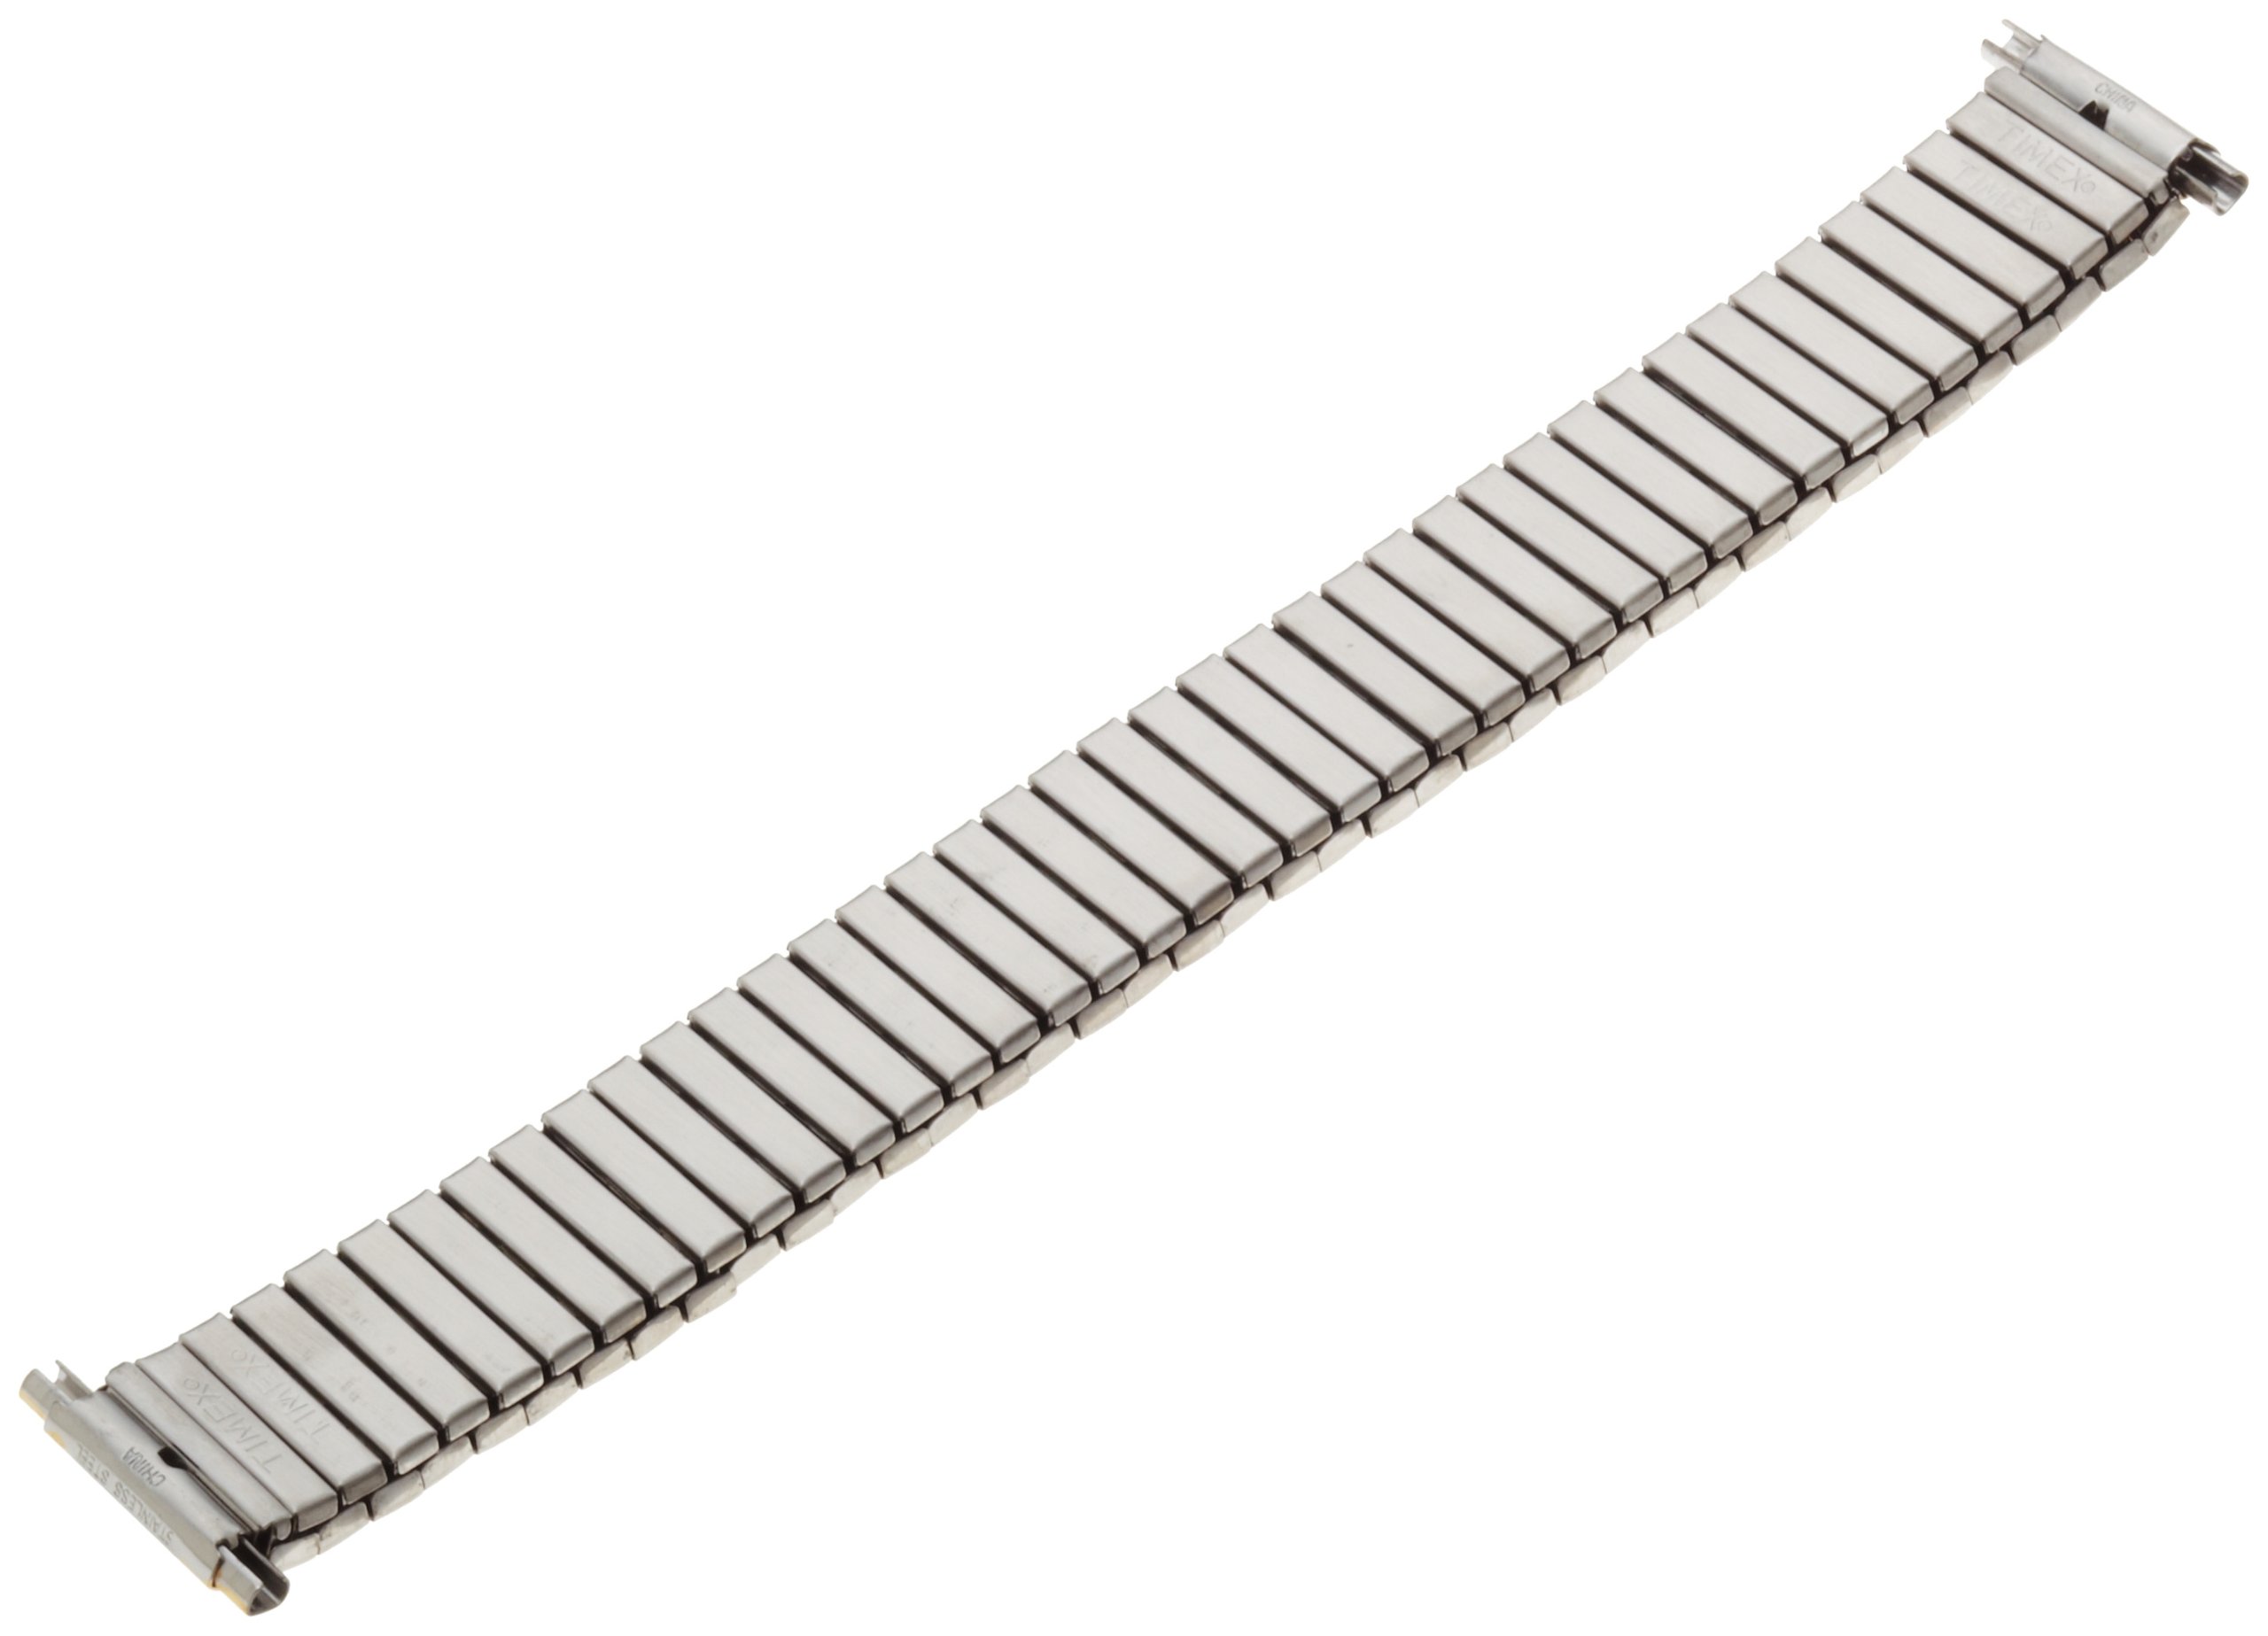 Timex Men's Q7B744 Two-Tone Stainless Steel Expansion 16-20mm Replacement Watchband